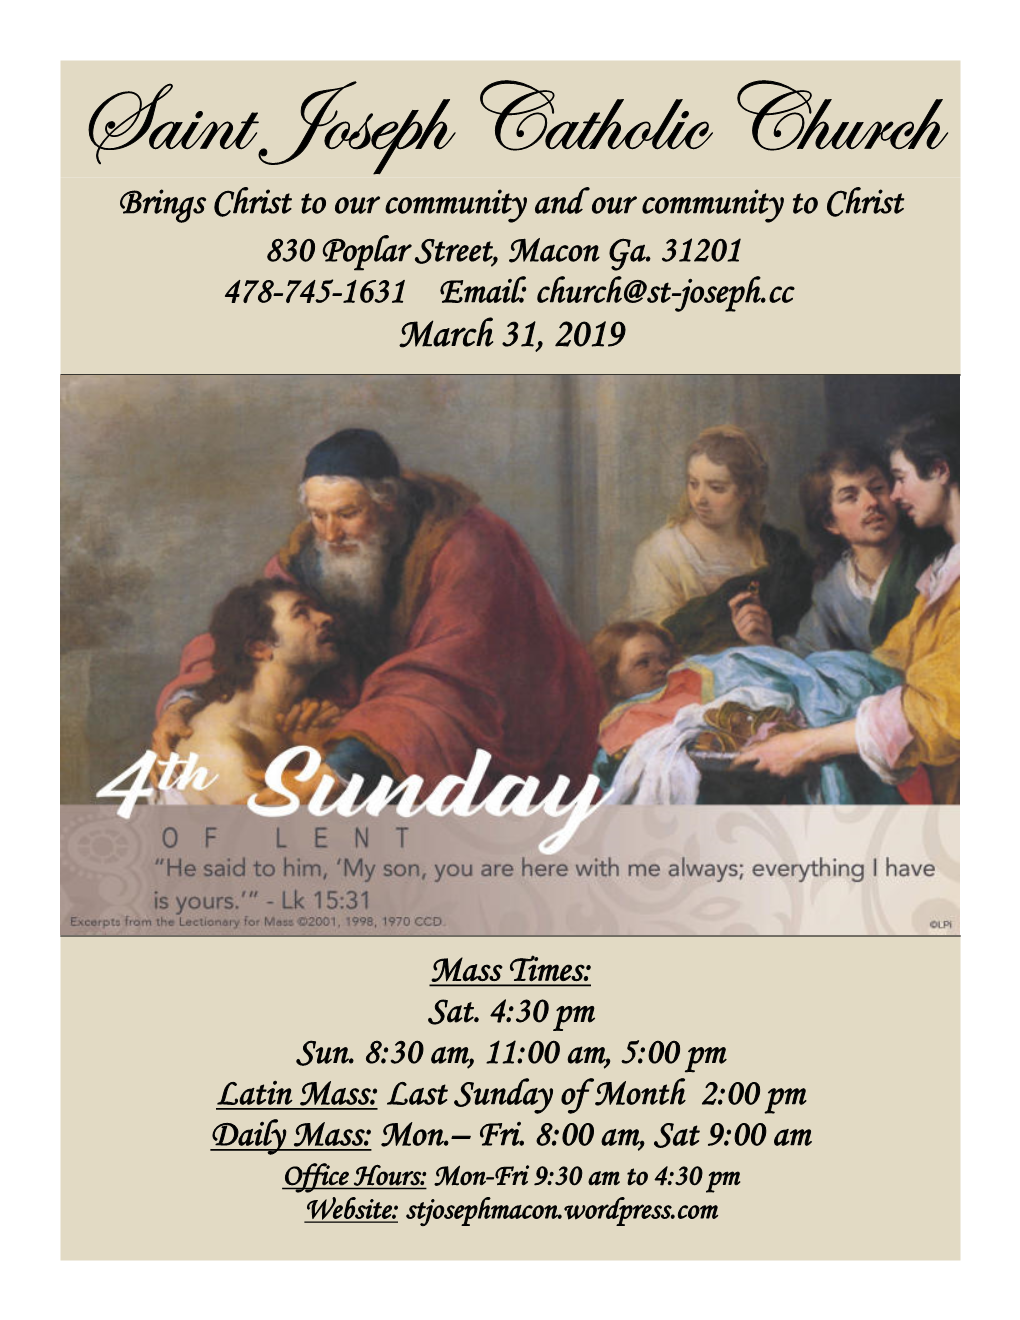 Saint Joseph Catholic Church Brings Christ to Our Community and Our Community to Christ